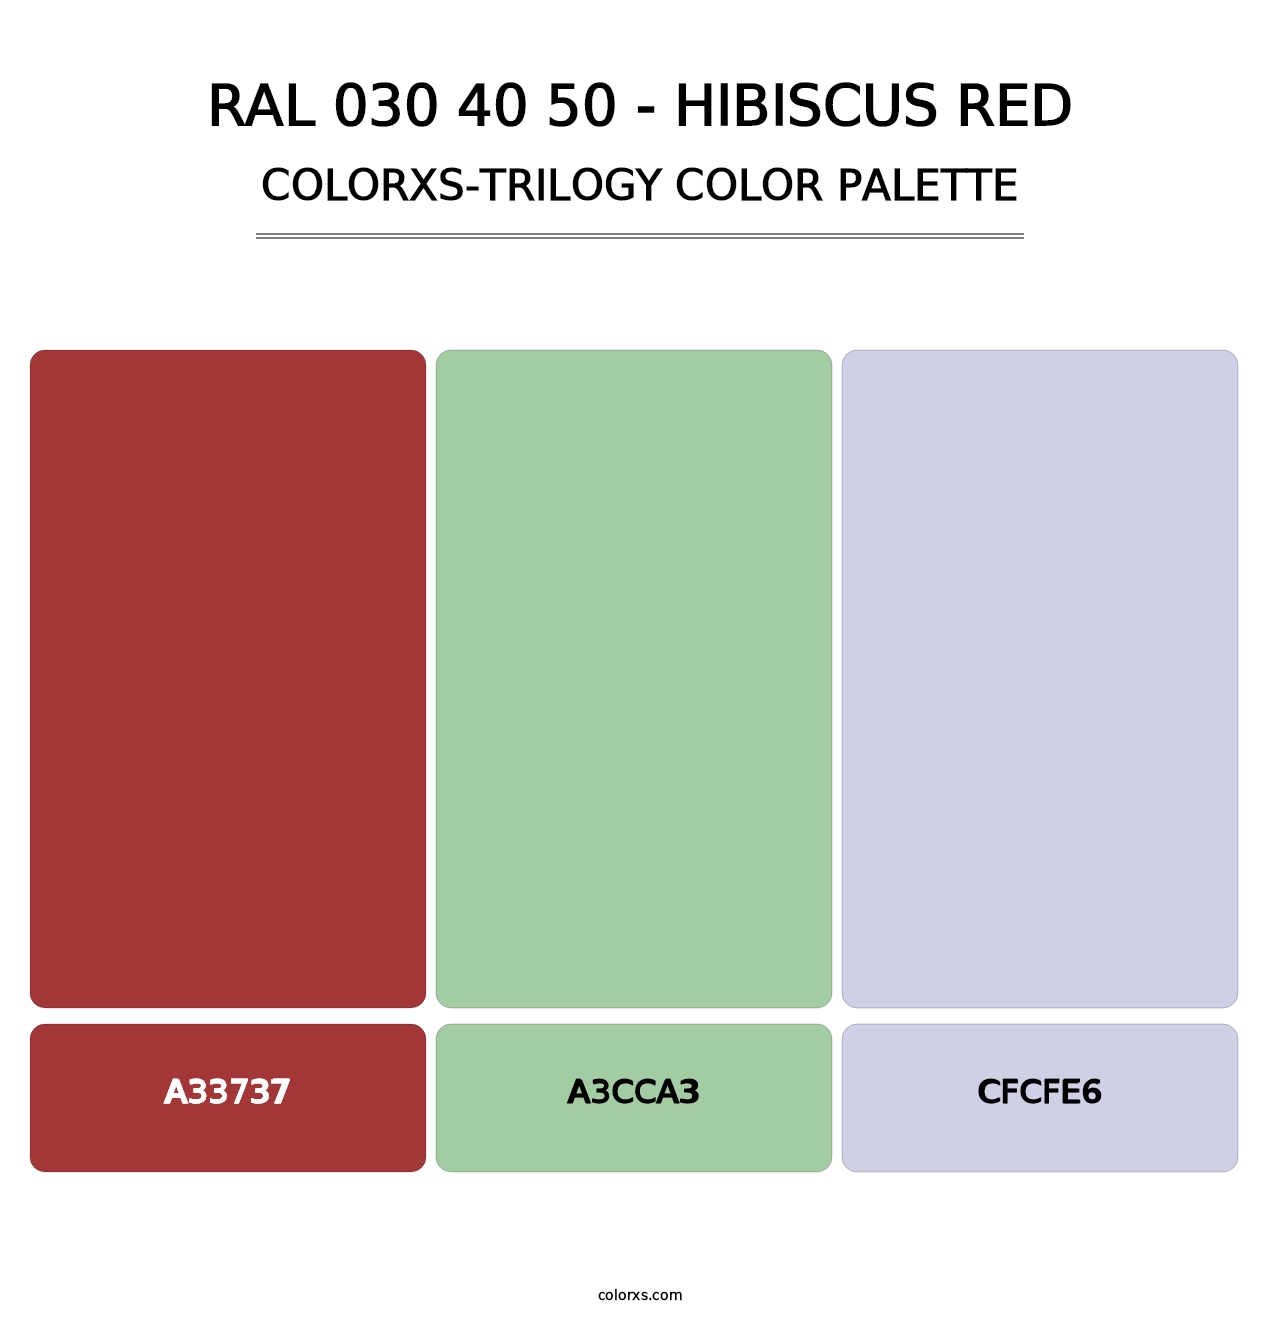 RAL 030 40 50 - Hibiscus Red - Colorxs Trilogy Palette